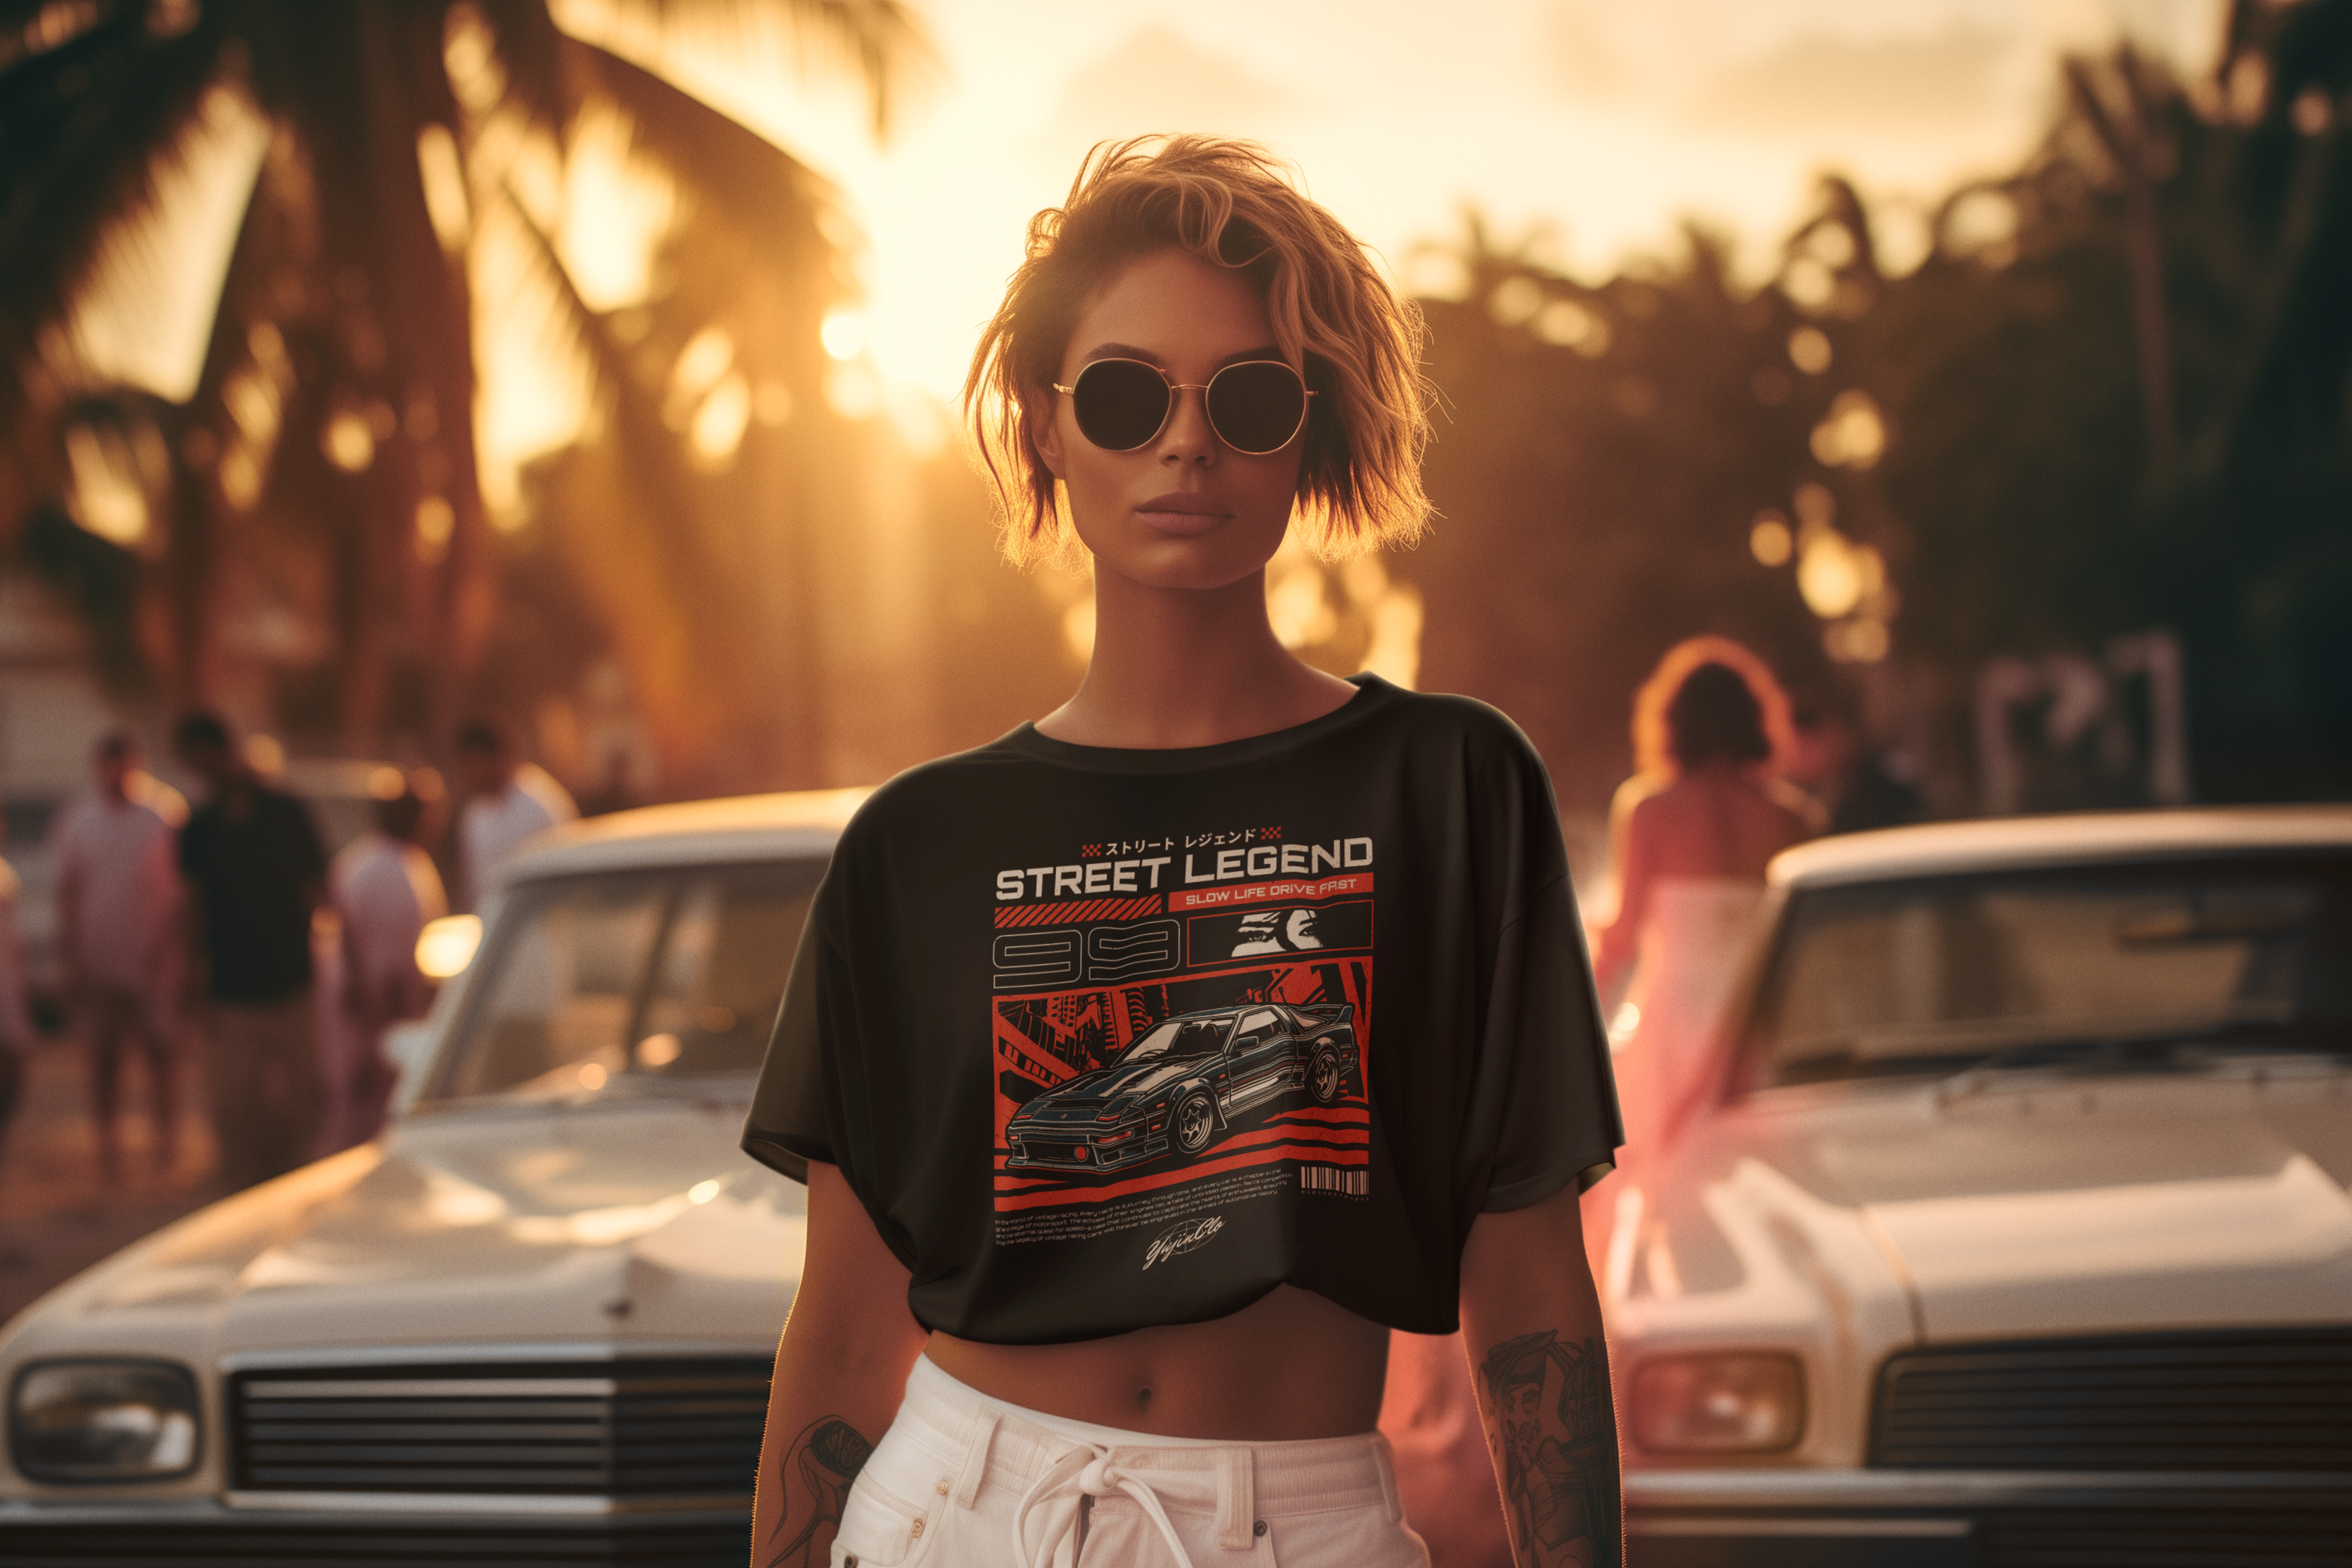 gta-inspired-mockup-of-a-woman-wearing-a-crop-top-in-front-of-classic-cars-m38014_1.png